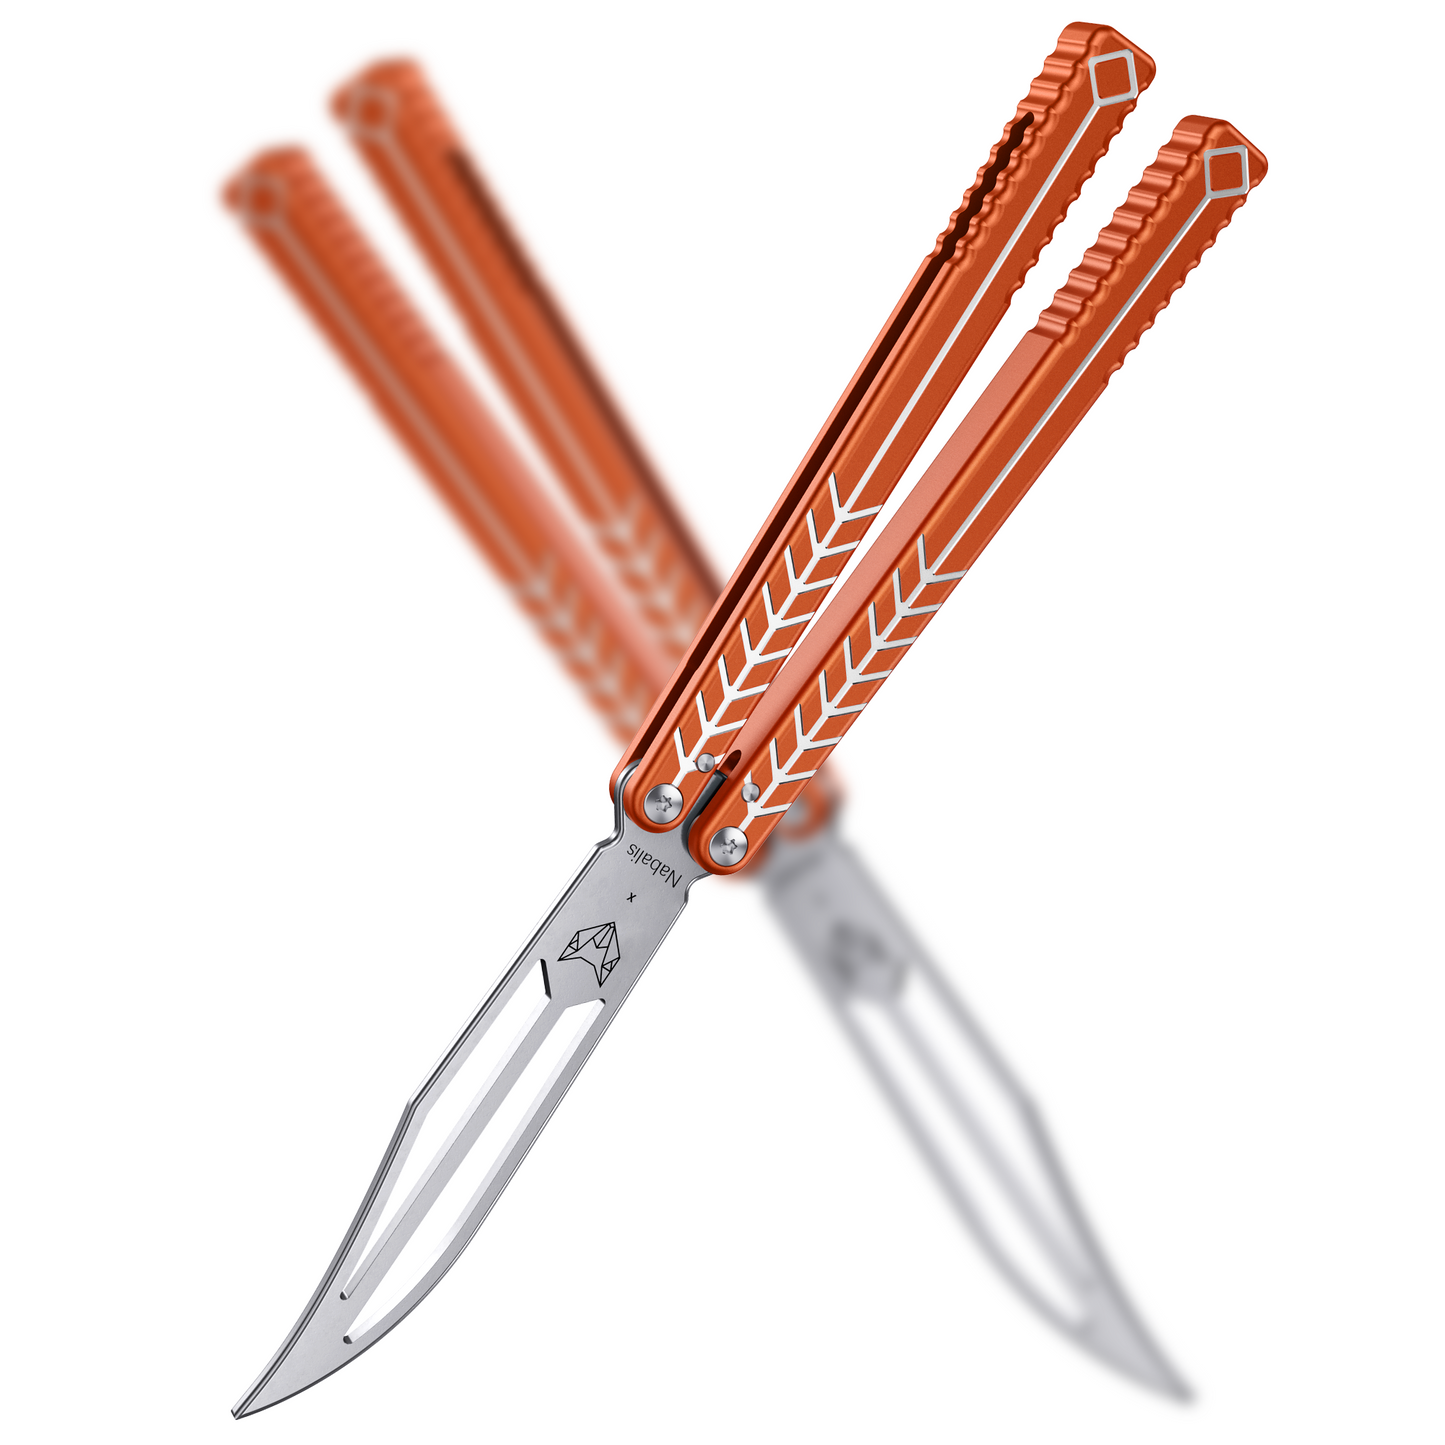 The Vulp(Without Opener) Butterfly Knife Balisong Trainer - The first trainer of Nabalis x Will Hirsch